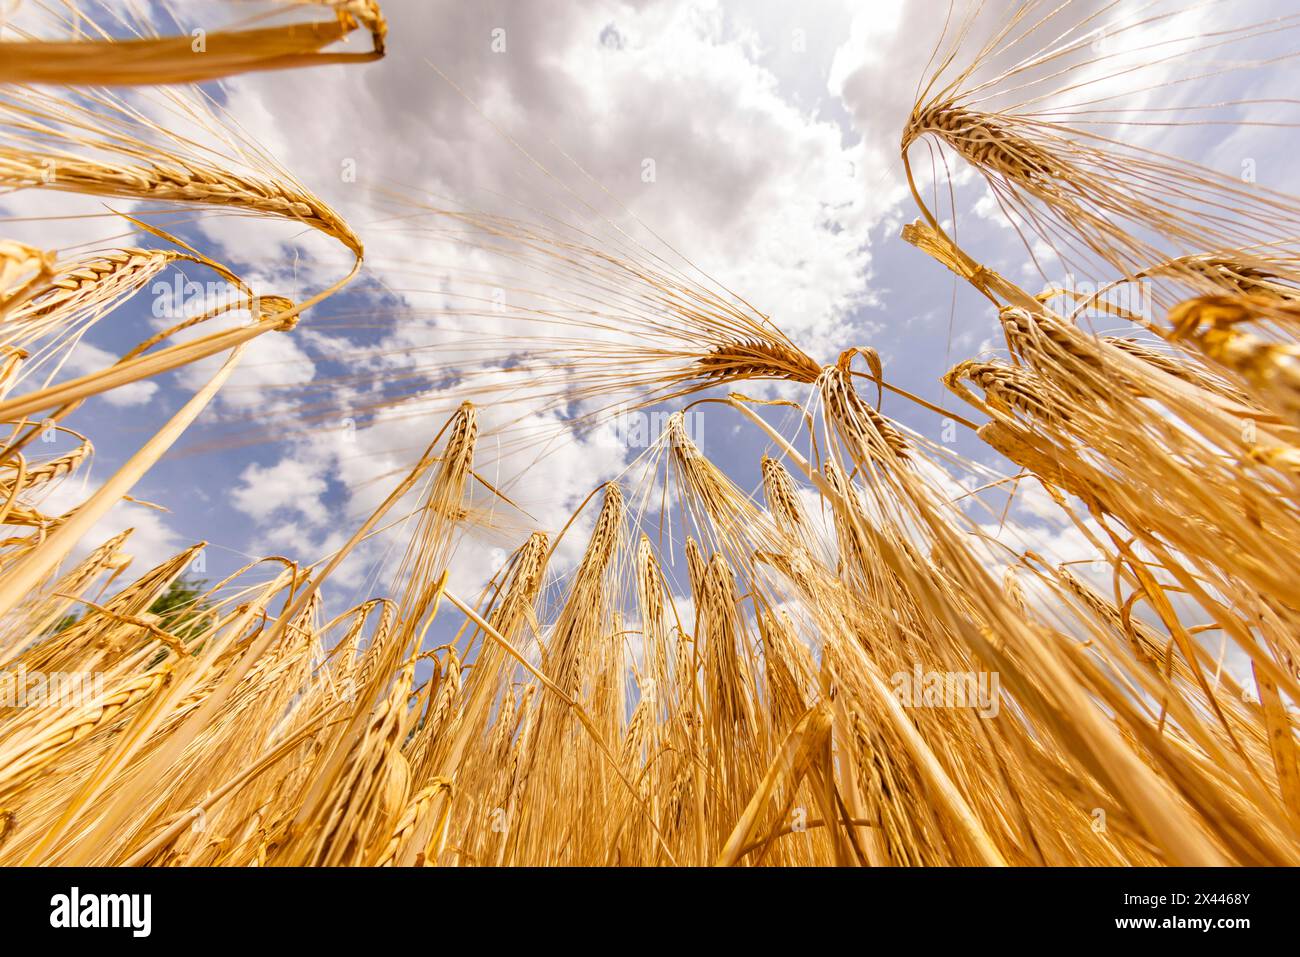 Ripe ears of barley in front of a clear blue sky with white clouds, Cologne, North Rhine-Westphalia, Germany Stock Photo